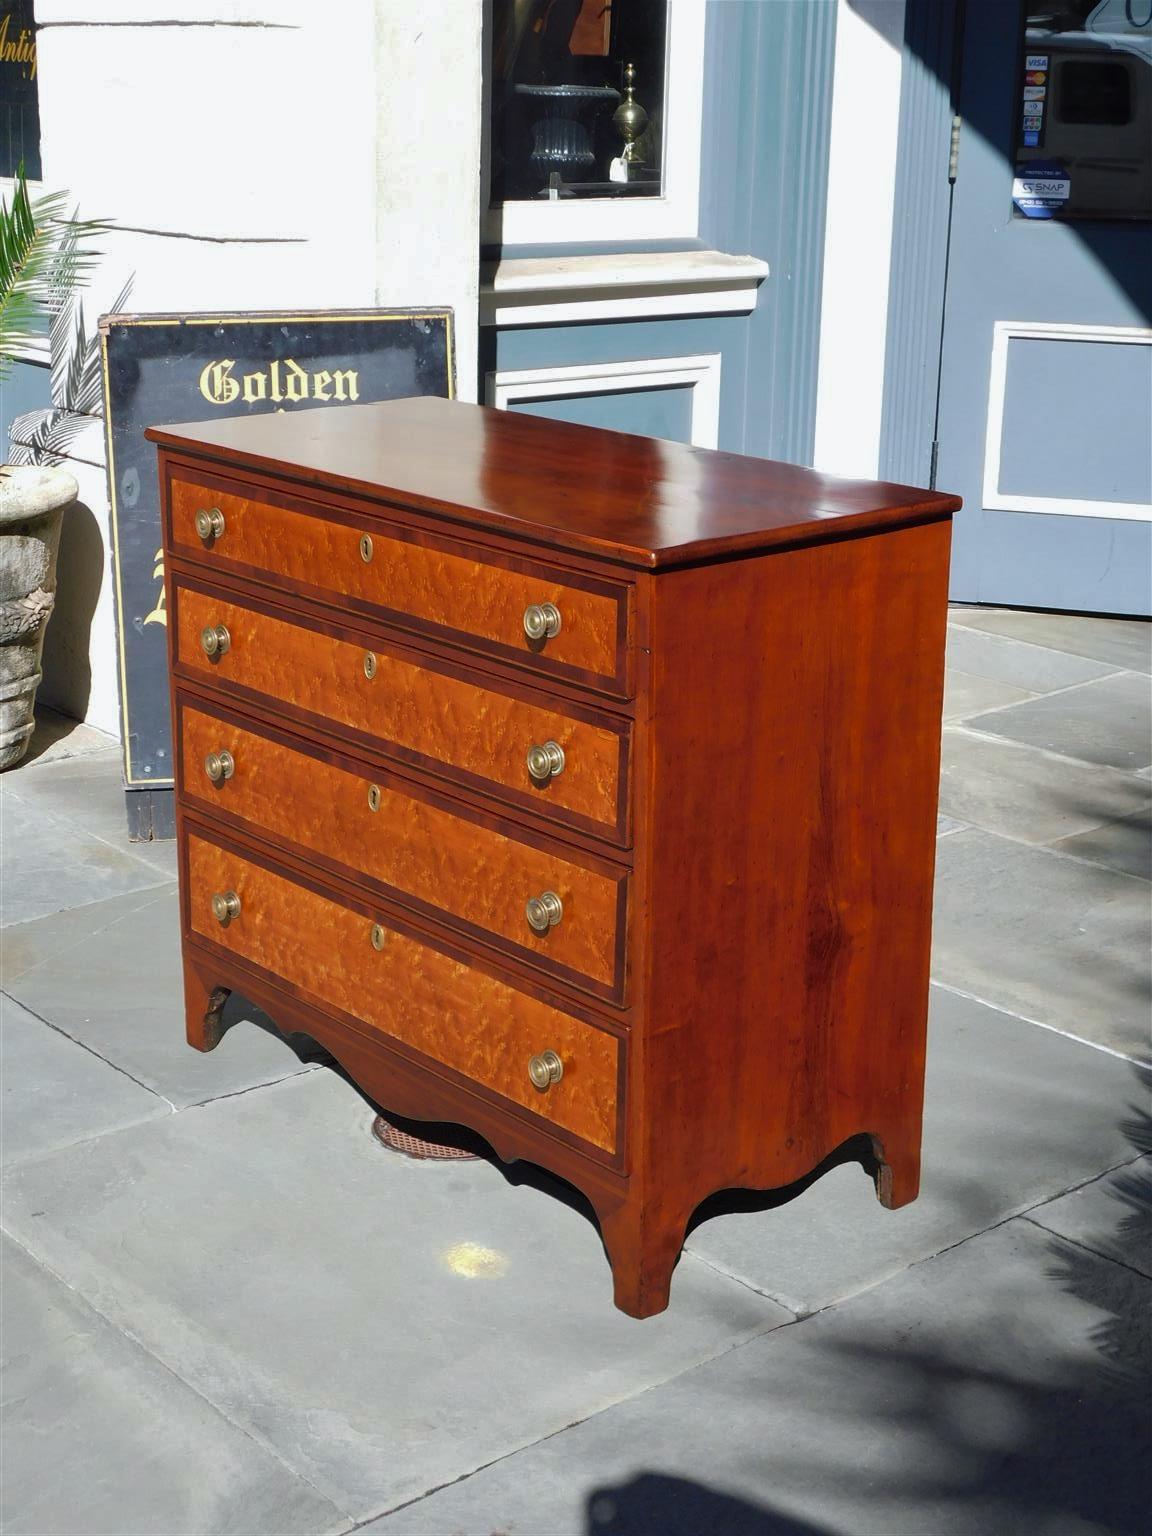 American Hepplewhite cherry and birds eye maple chest with a carved molded top, four graduated drawers. mahogany cross banding, circular brass knobs with escutcheons, scalloped skirt with box wood string inlay, and resting on the original bracket